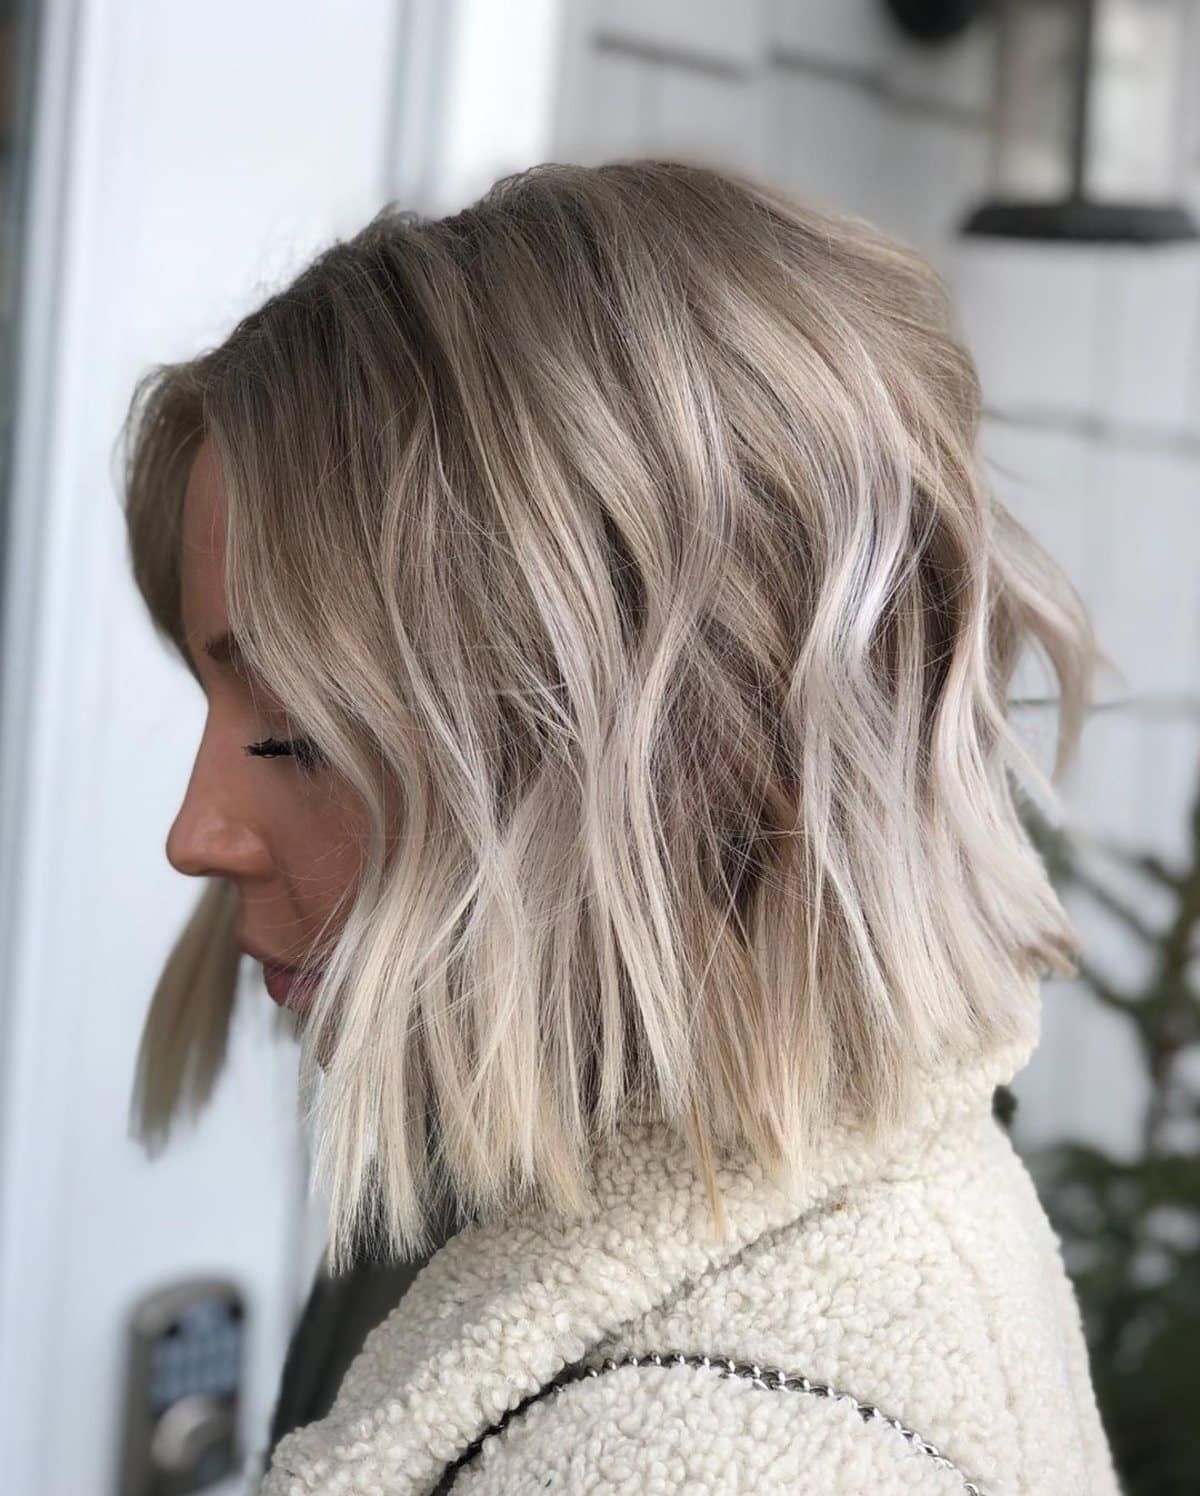 42 Trendiest Short Blonde Bob Ideas Right Now Pertaining To Blonde Balayage Shaggy Bob Hairstyles (View 17 of 20)